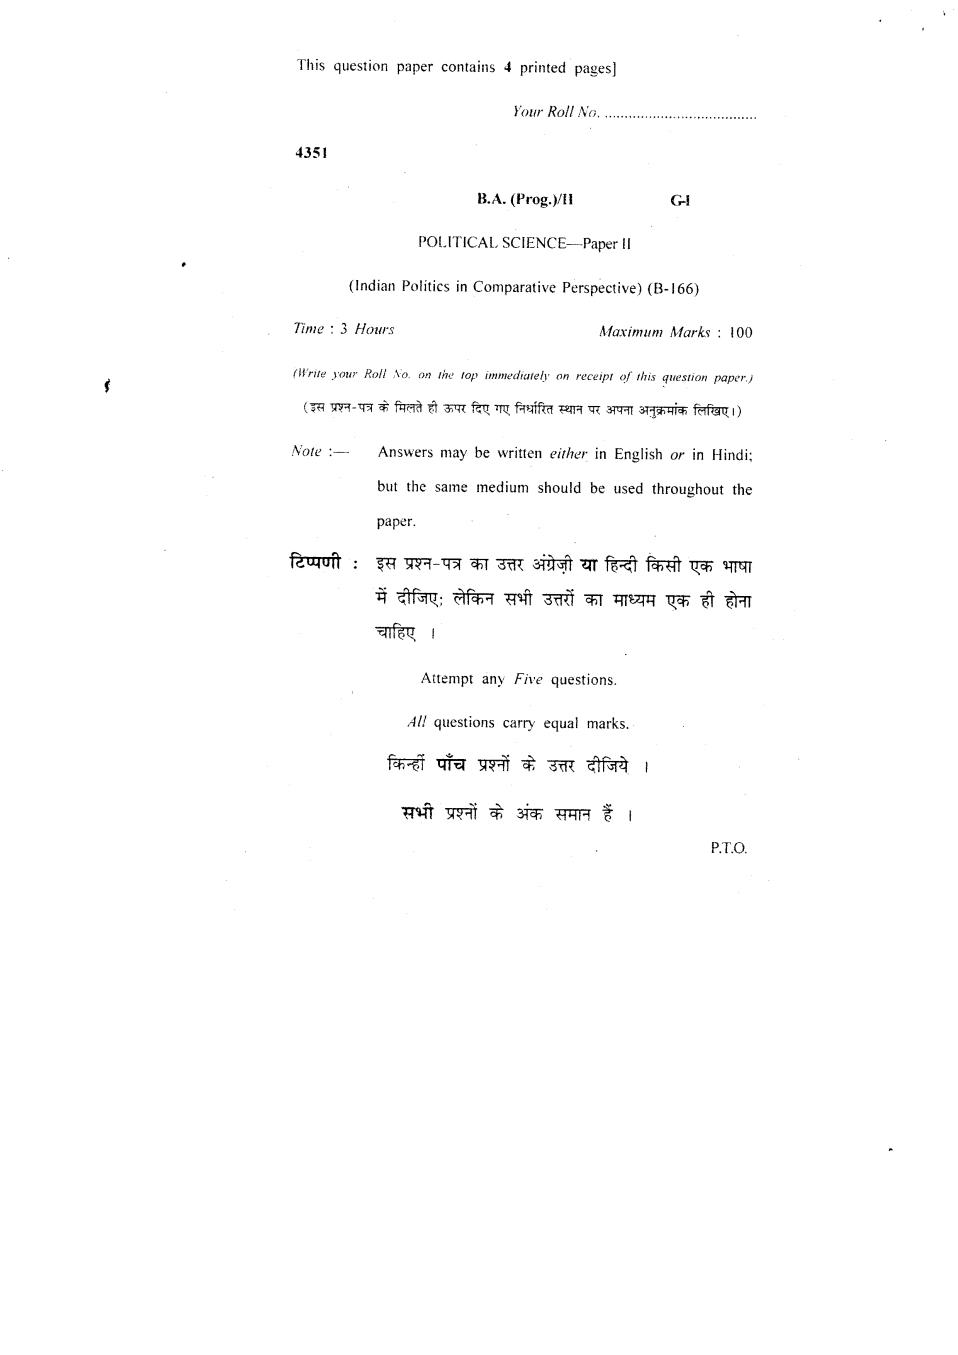 DU SOL Question Paper 2018 BA Political Science - Indian Politics in Comparative Perspective - Page 1